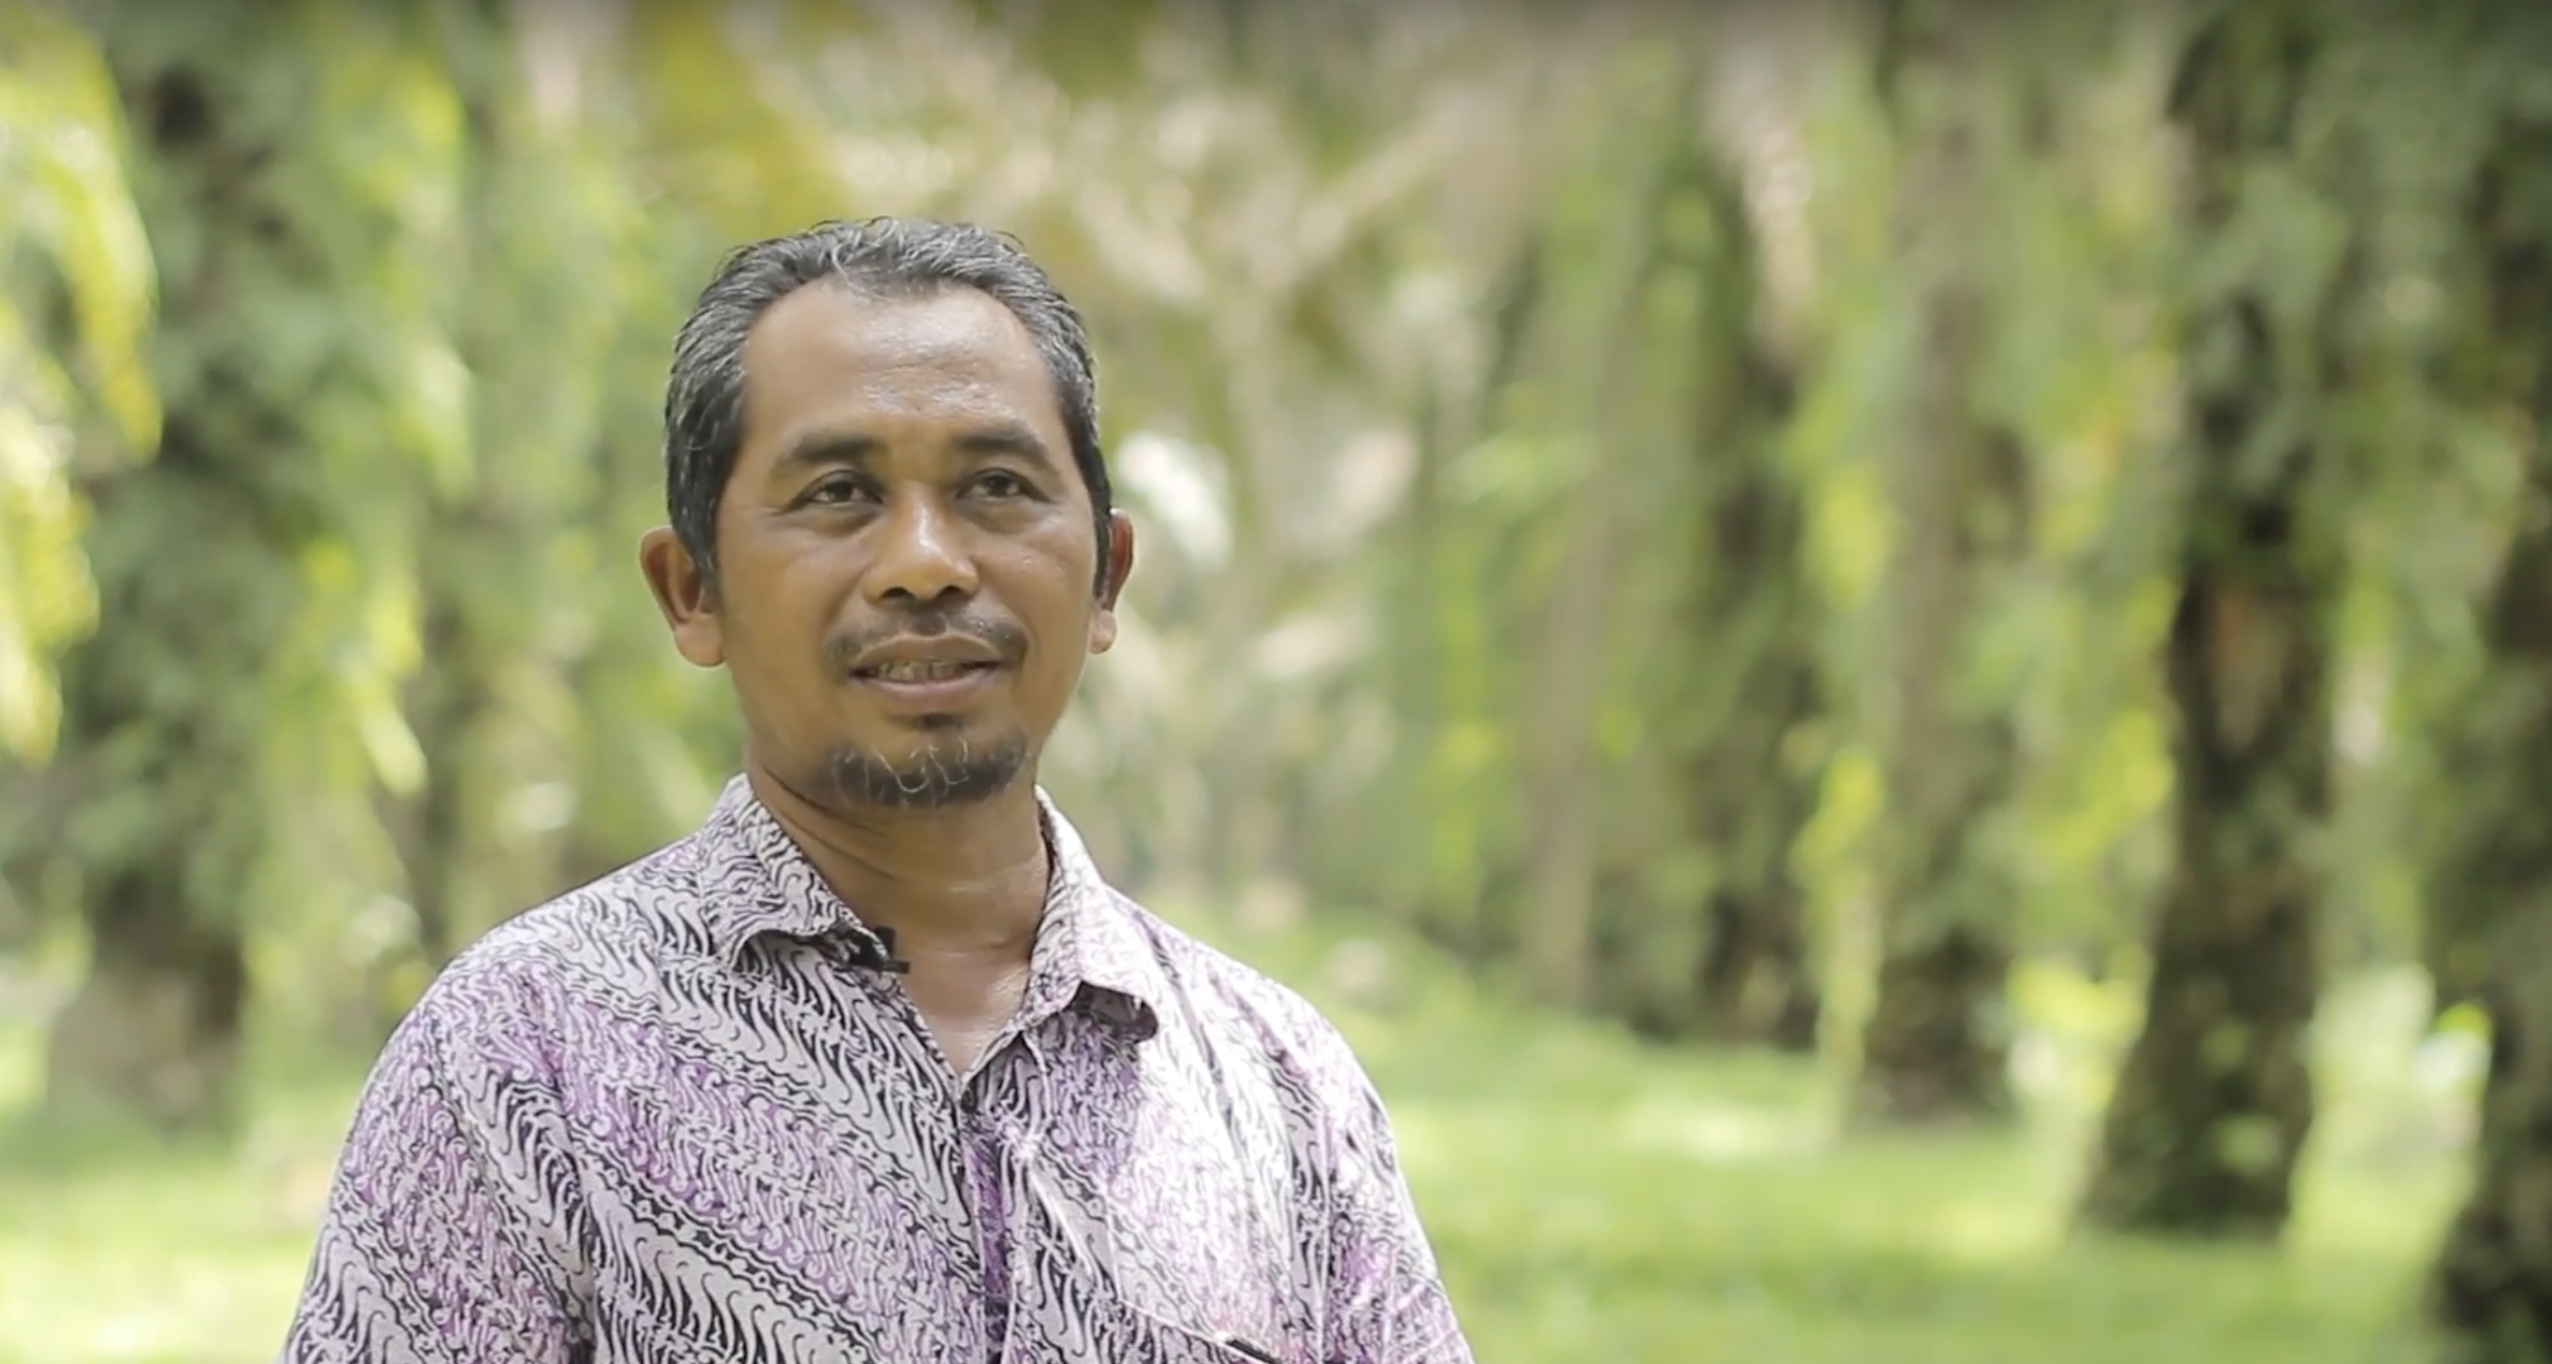 RSPO Credits put dreams within reach